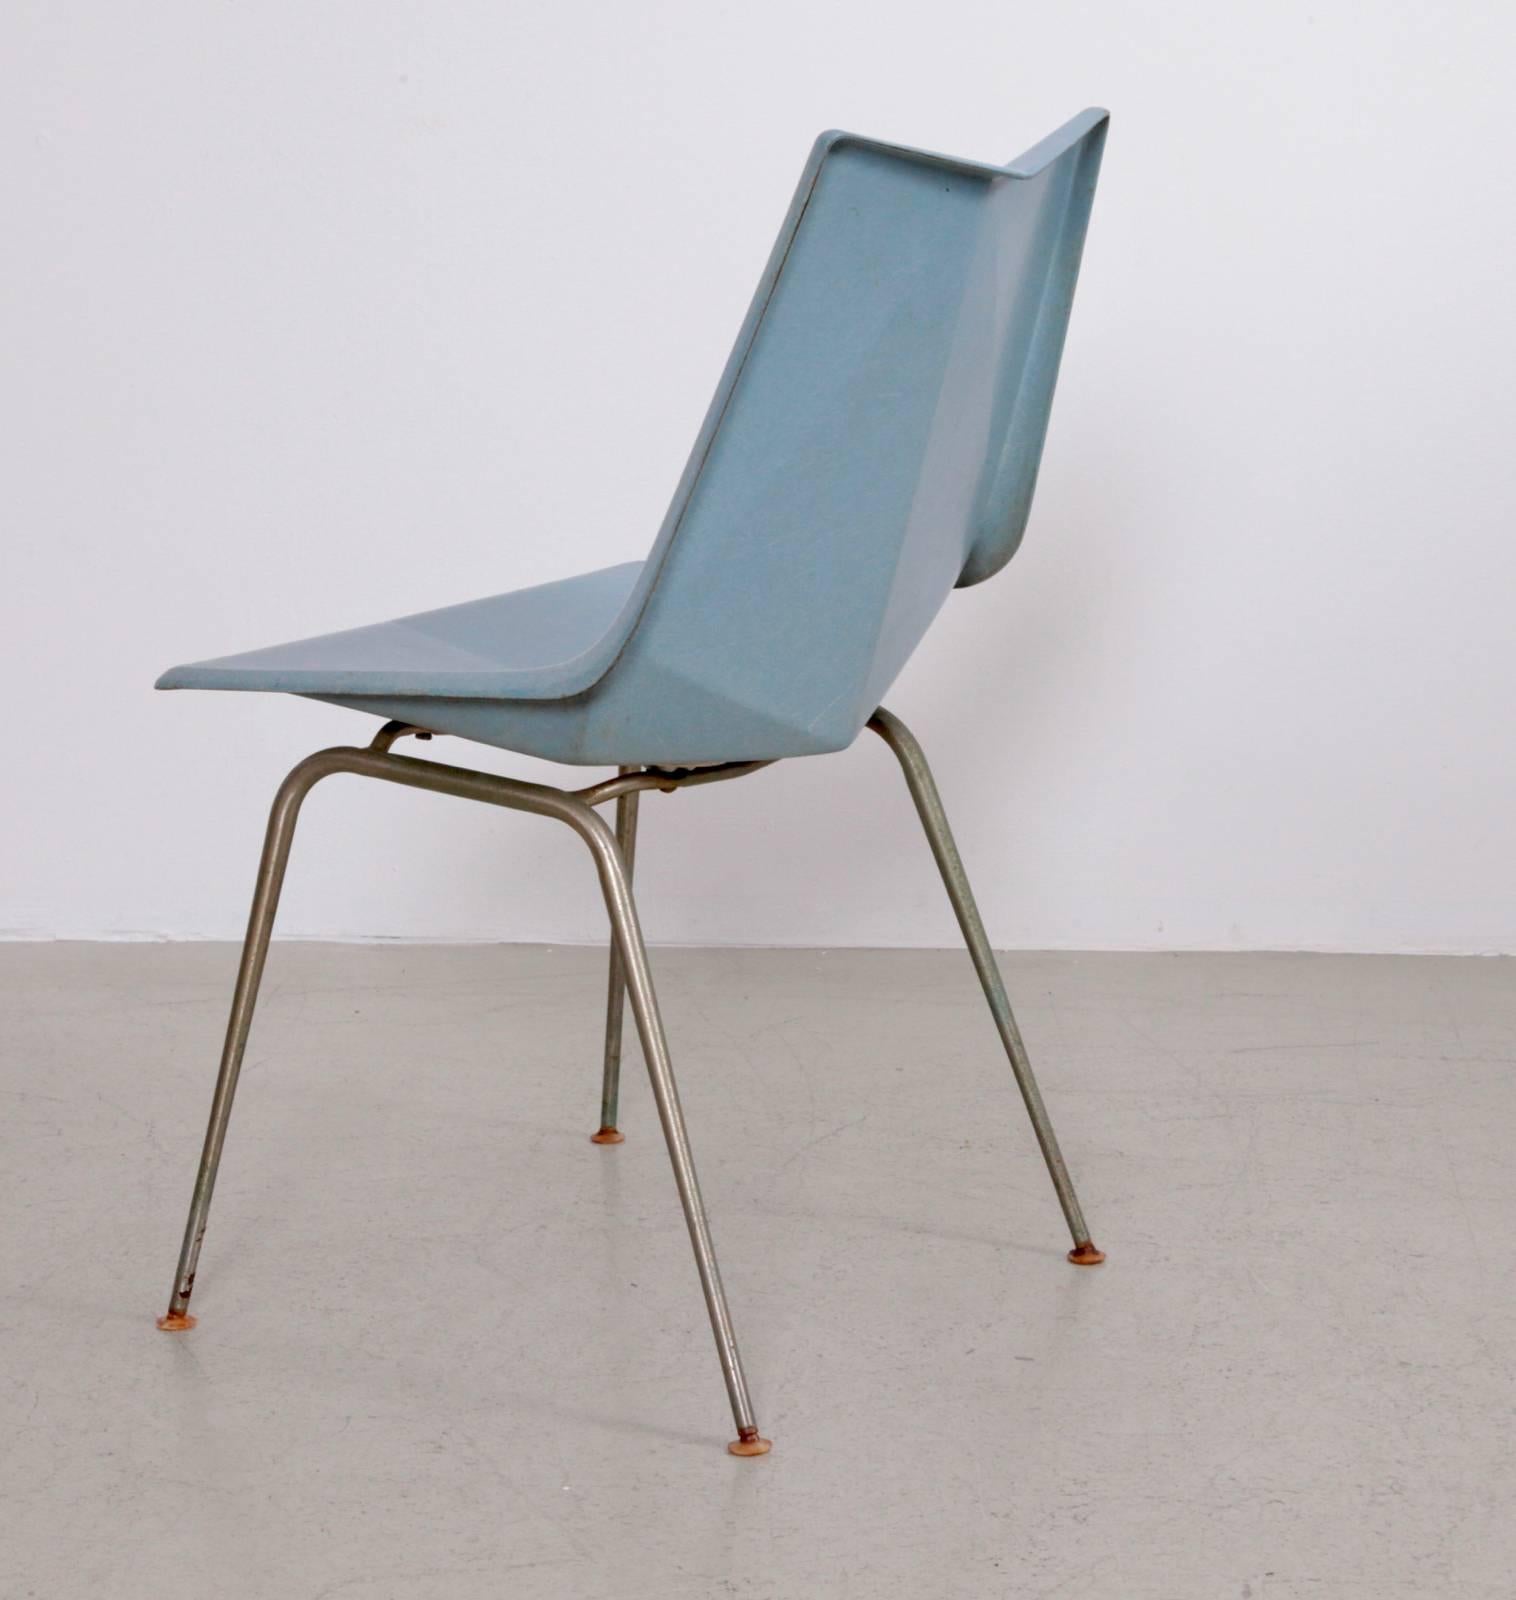 A 1950s light blue Paul McCobb Origami chair for St. John Seating. The fiberglass seat is molded at angles, reminiscent of the Japanese origami technique. The chair stands on tubular iron legs. Labeled and in a good and original condition.